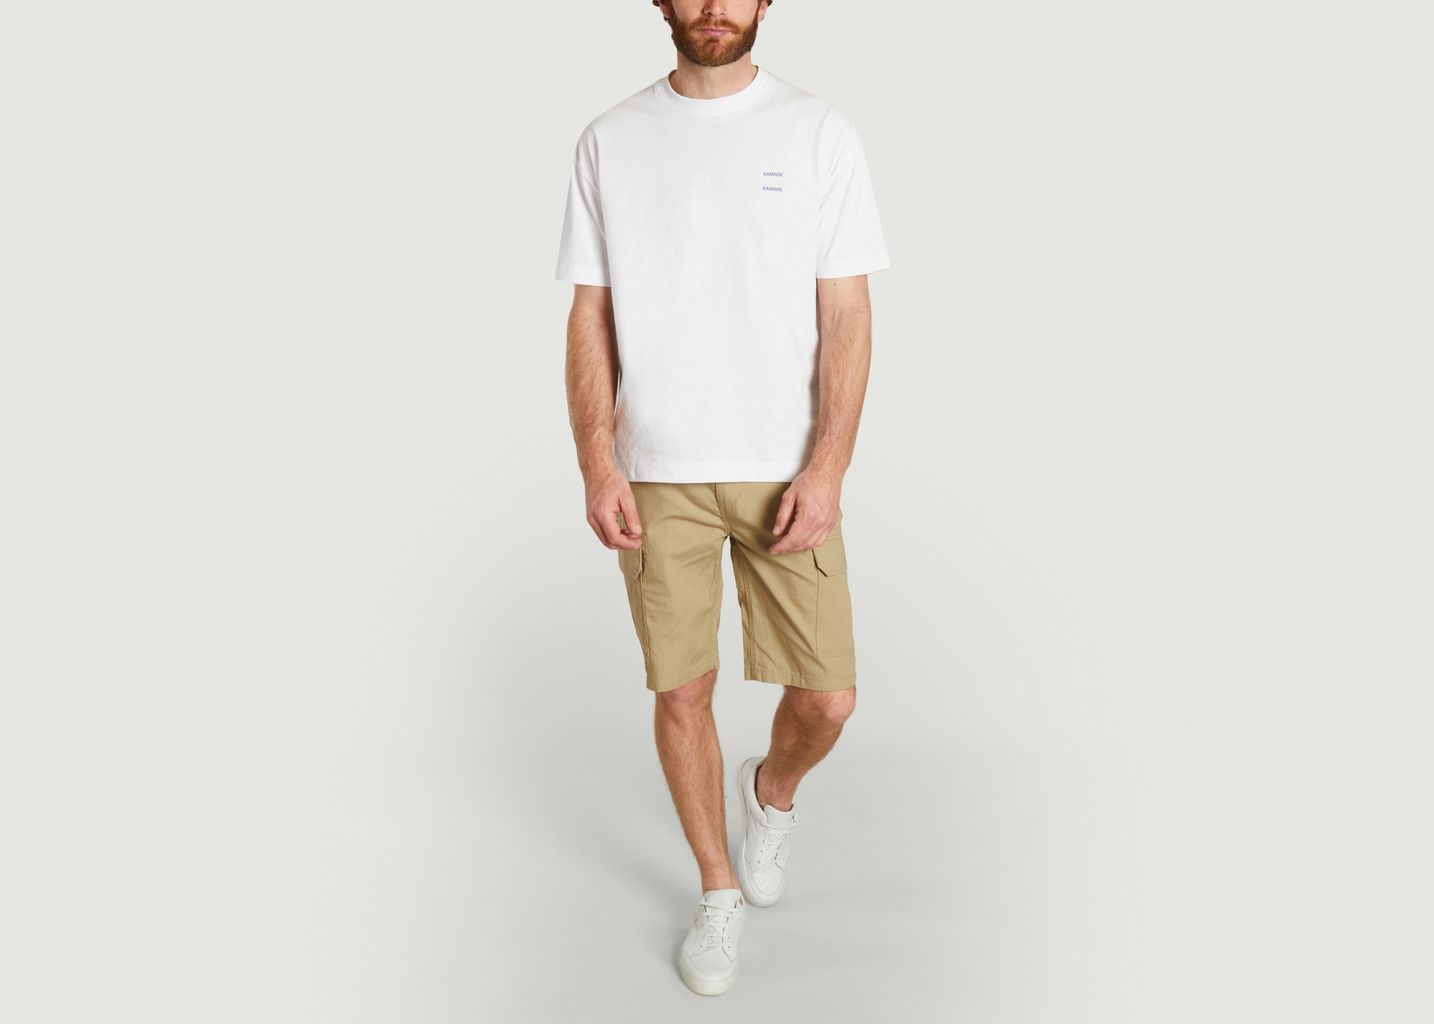 Millerville Shorts - Dickies